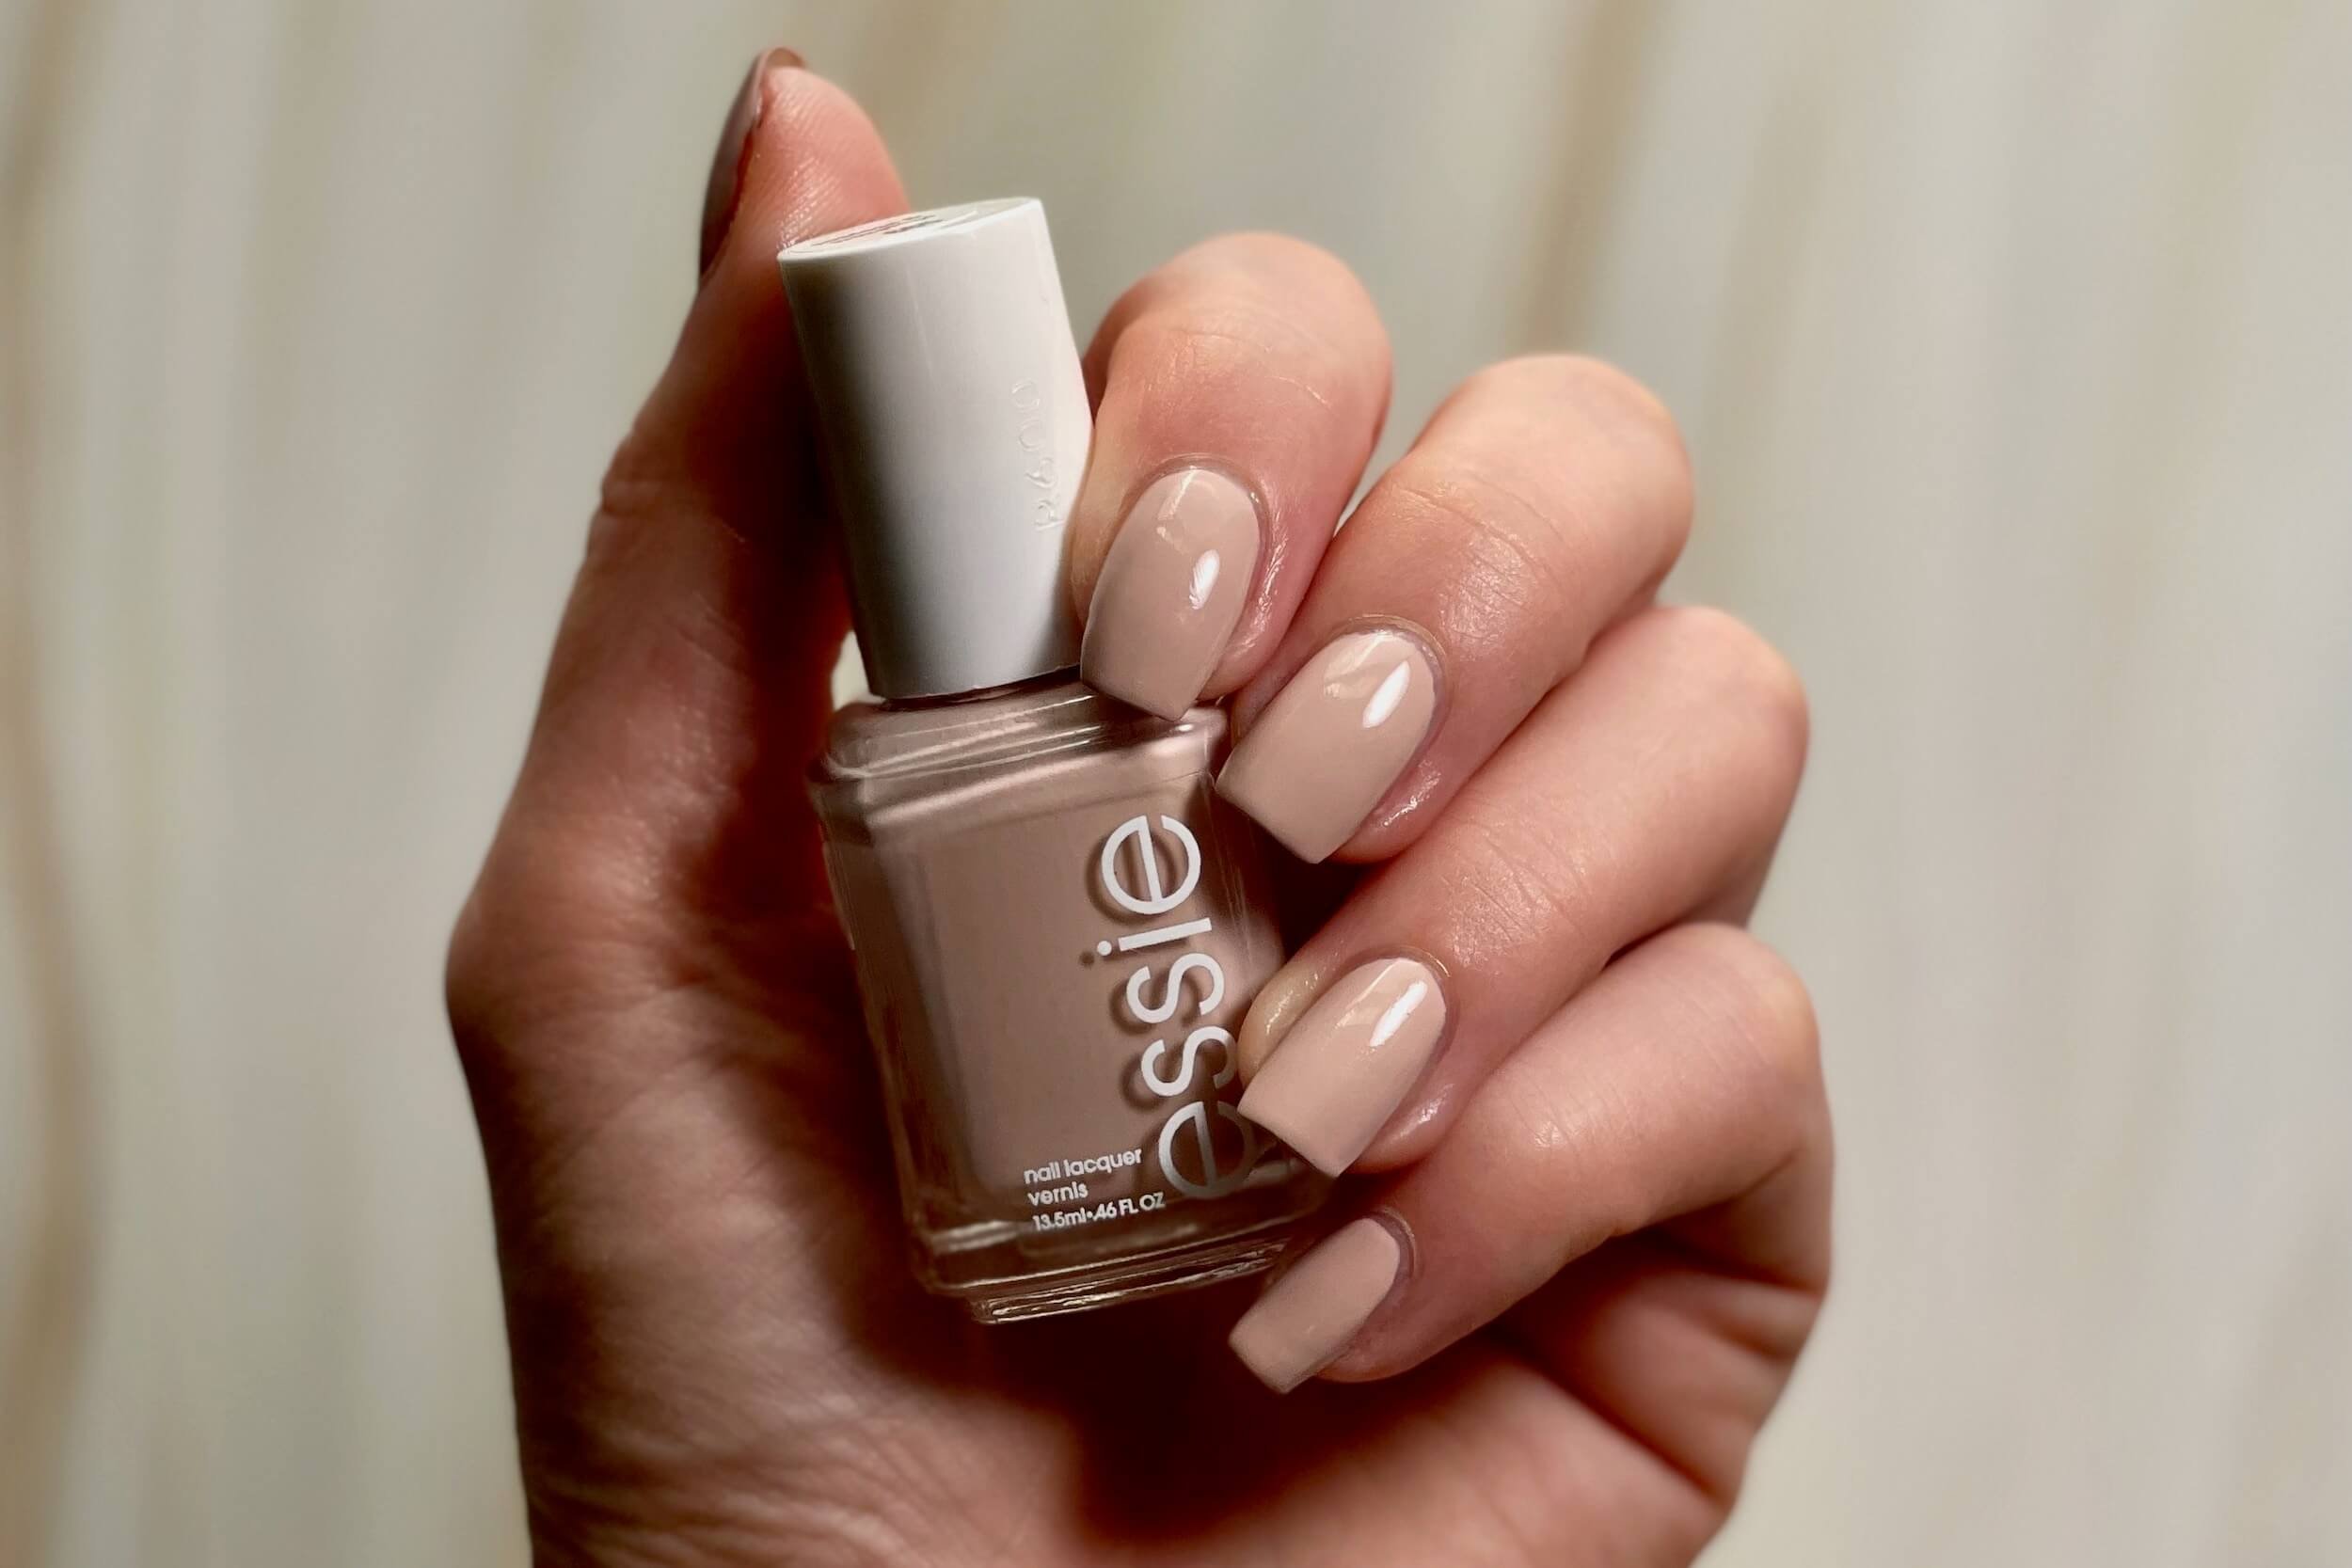 2. Essie "Topless and Barefoot" - wide 7